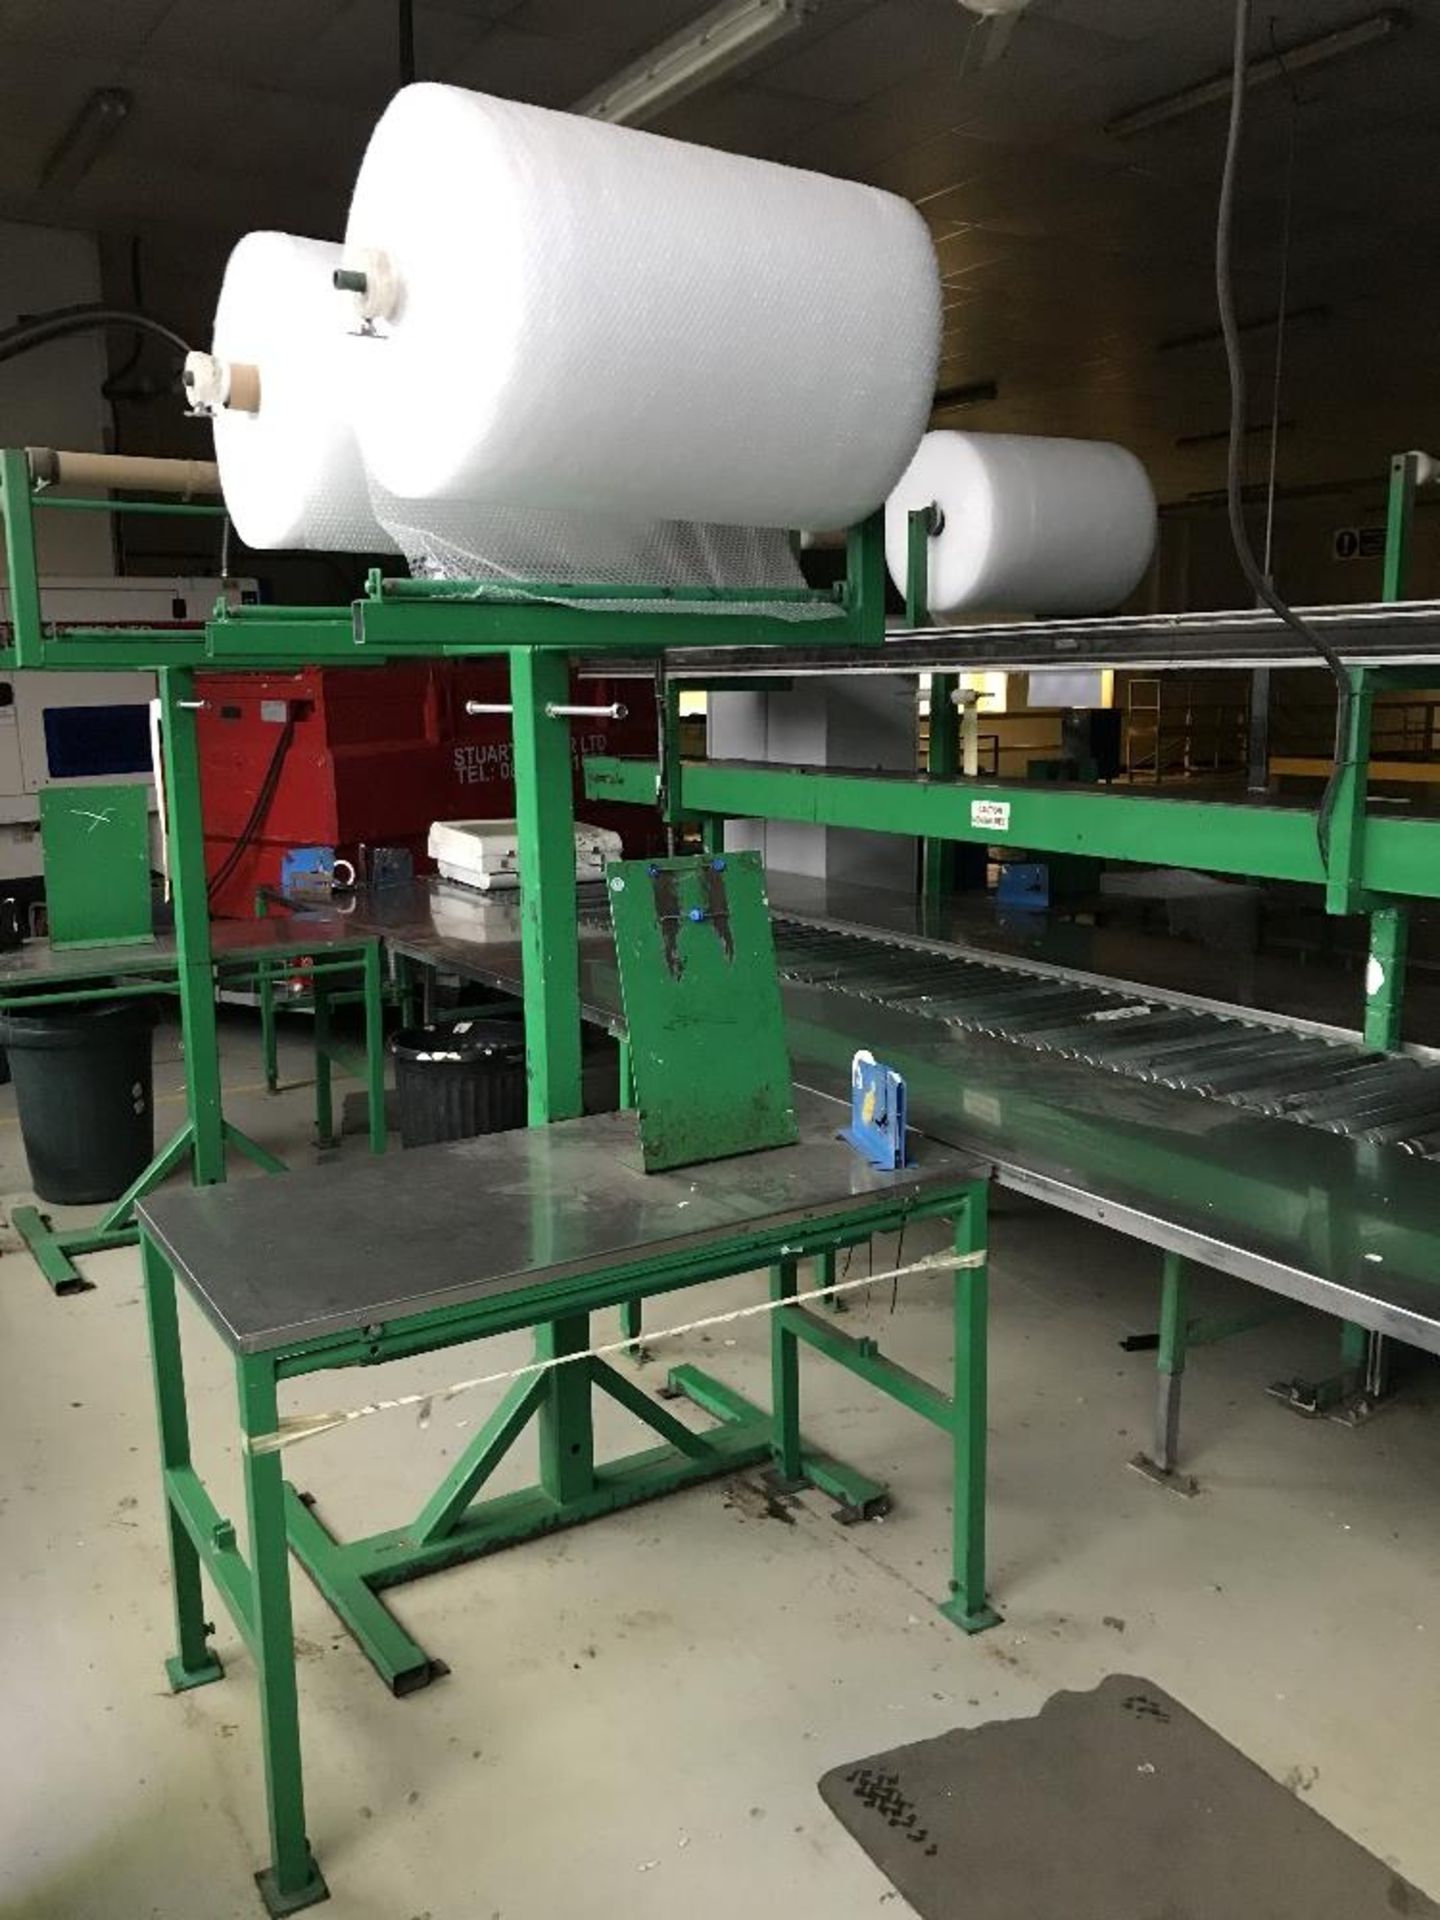 Manual Packing Line - Image 14 of 17